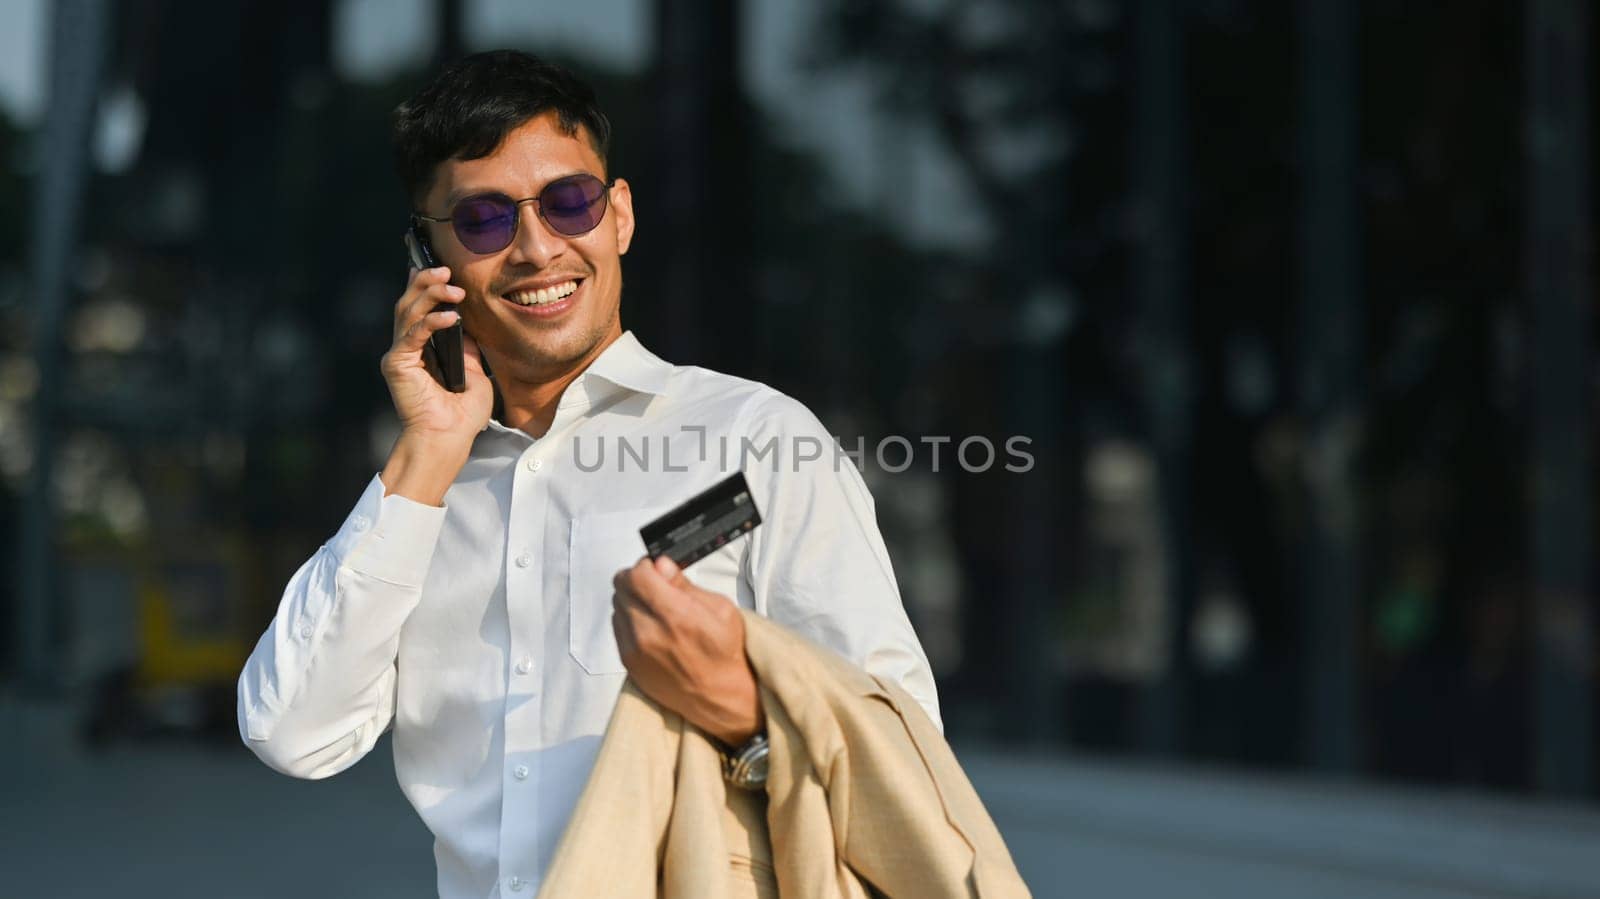 Smiling businessman utalking on mobile phone while walking in business district. Modern lifestyle, technology and business concept.